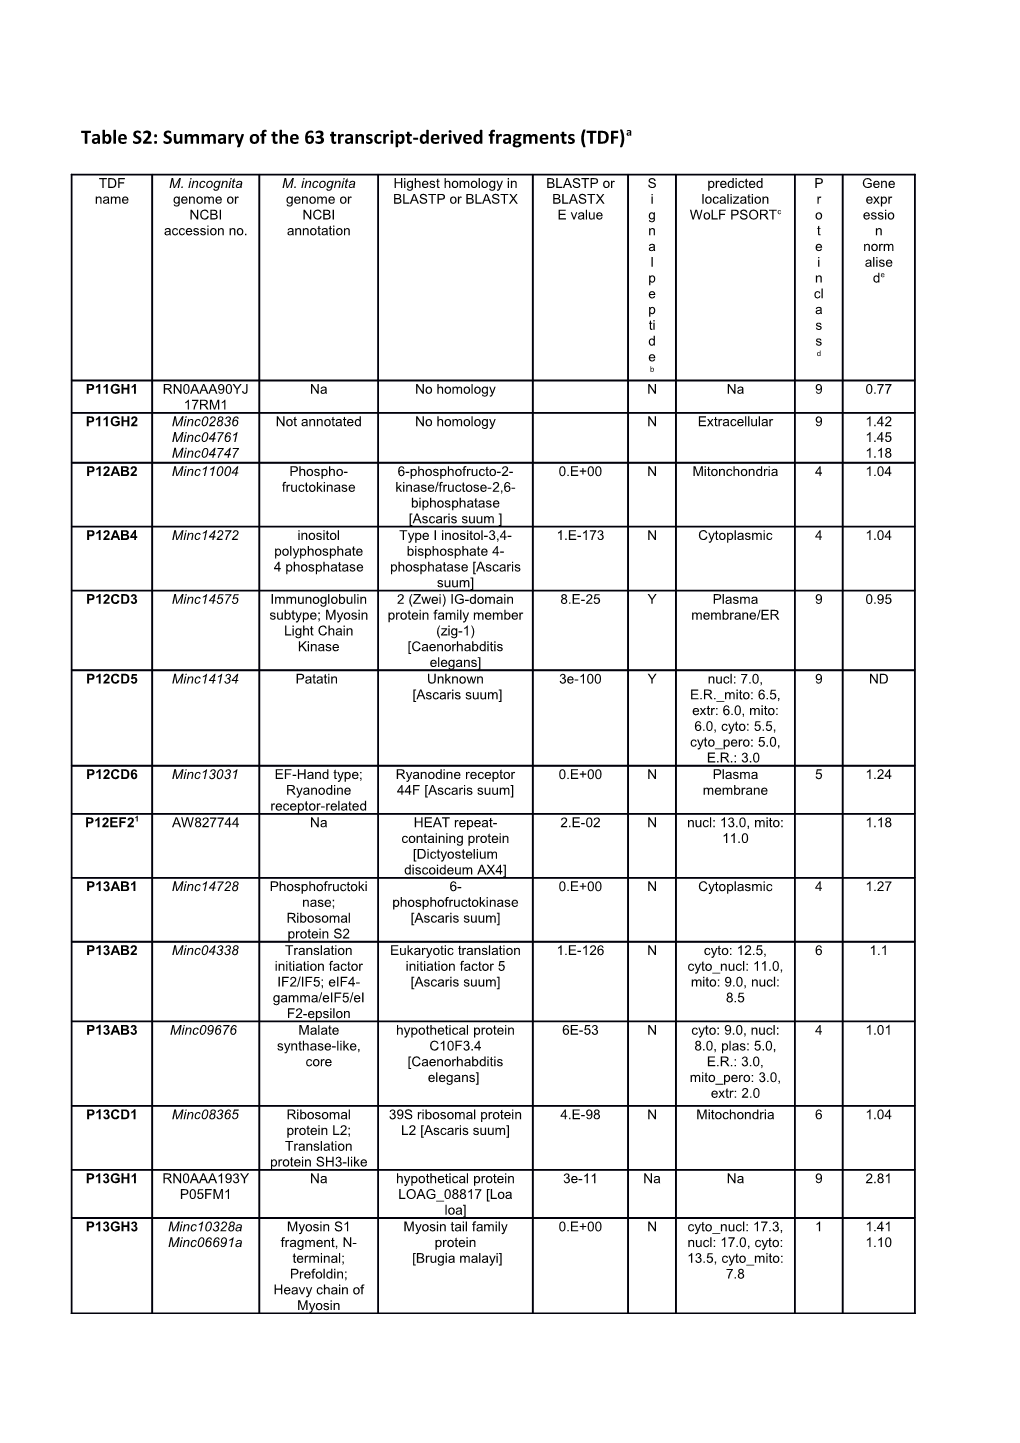 Table S2: Summary of the 63 Transcript-Derived Fragments (TDF)A